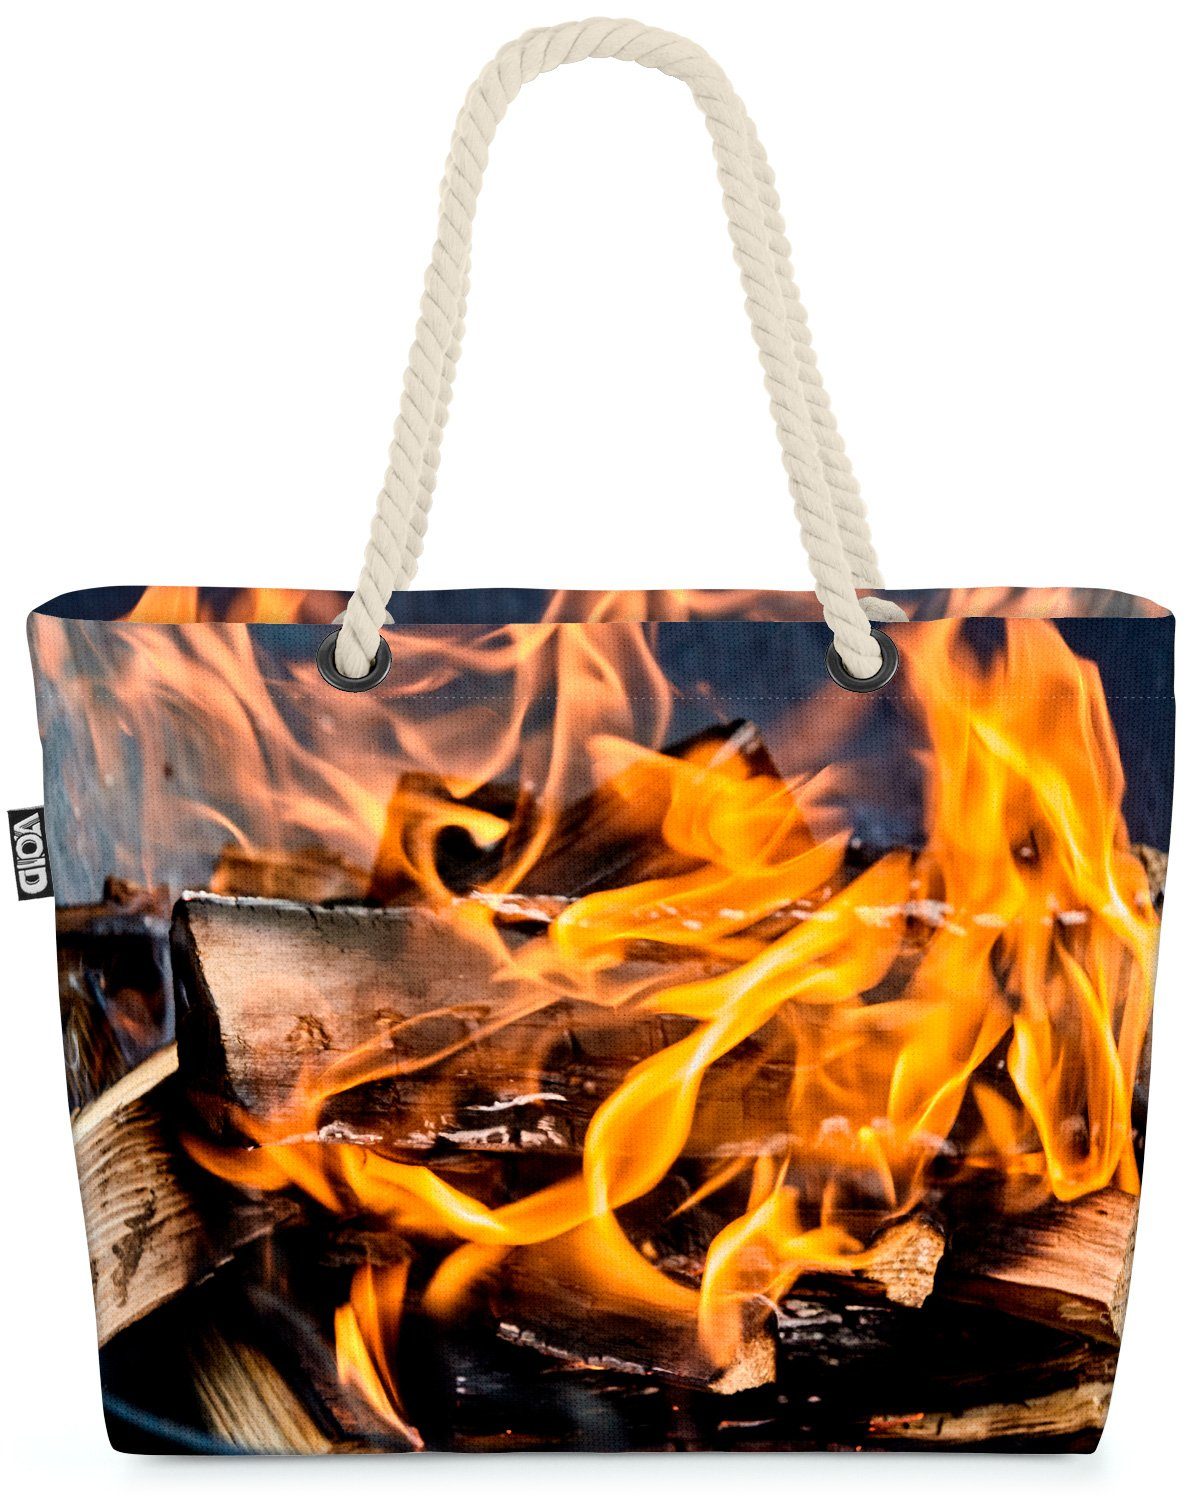 Schal Camping Grillen Party VOID Lagerfeuer Strandtasche Lagerfeuer Grillen Feuer (1-tlg), Feuer